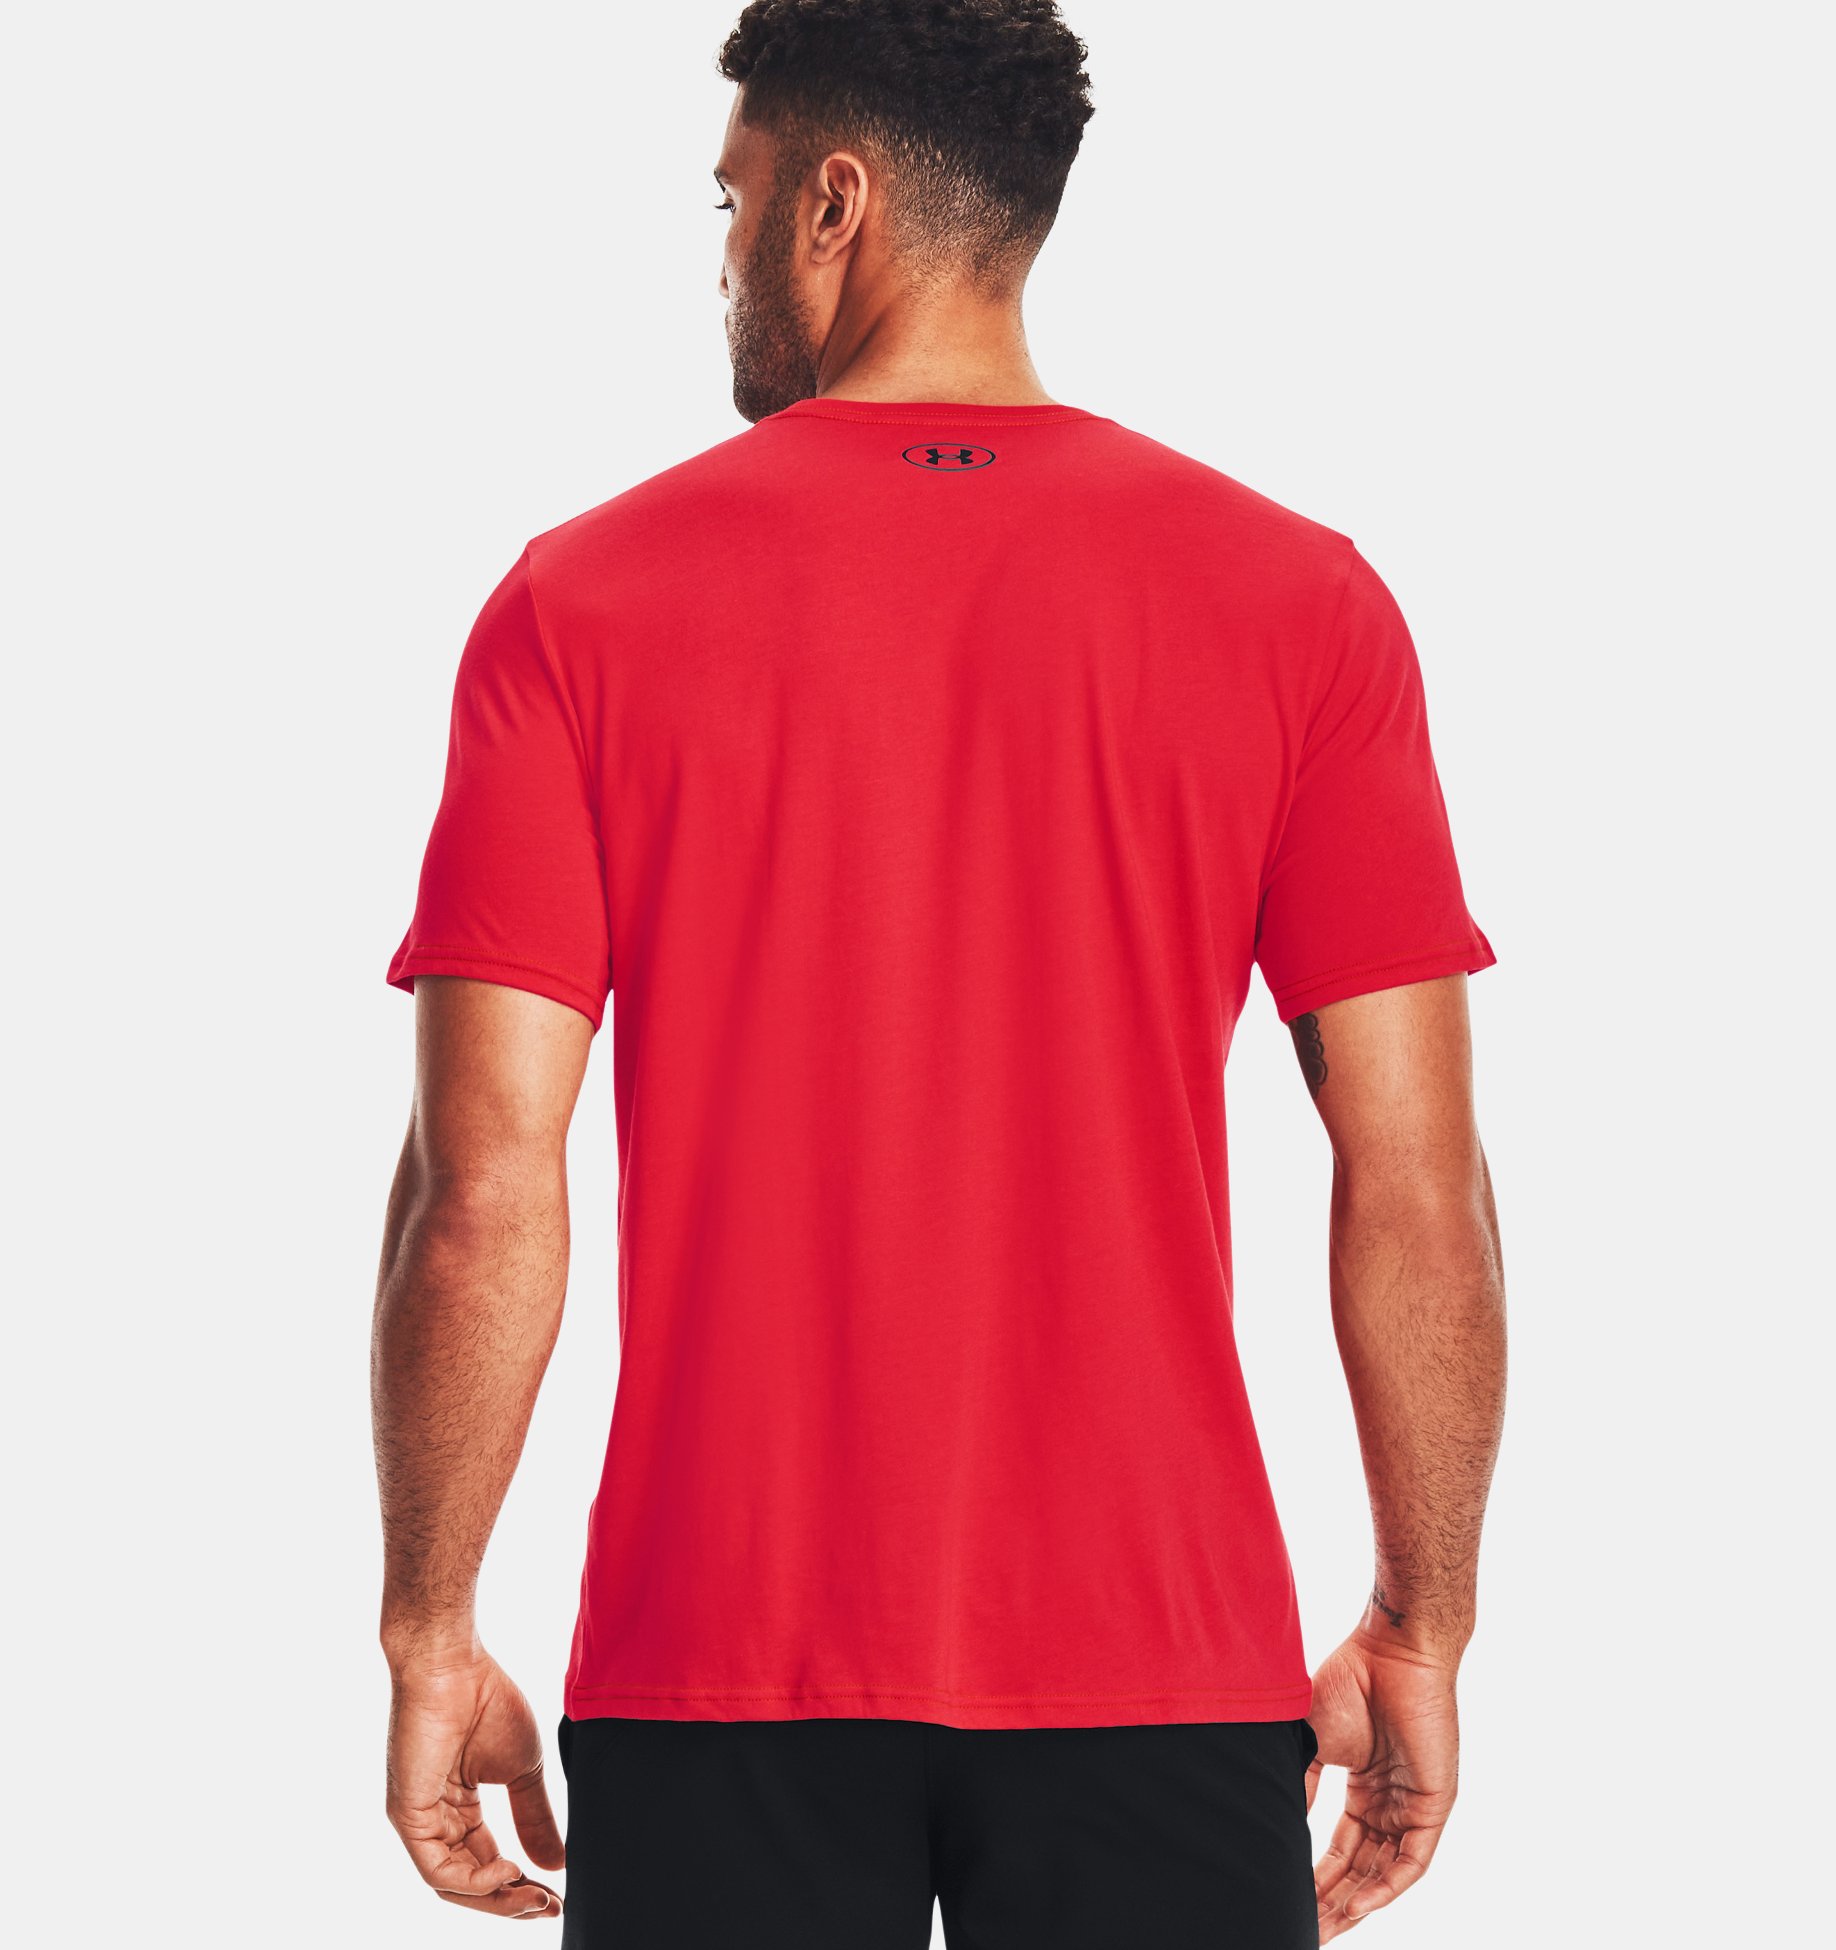 Under Armour Men's Boxed Sportstyle Short Sleeve T-shirt 